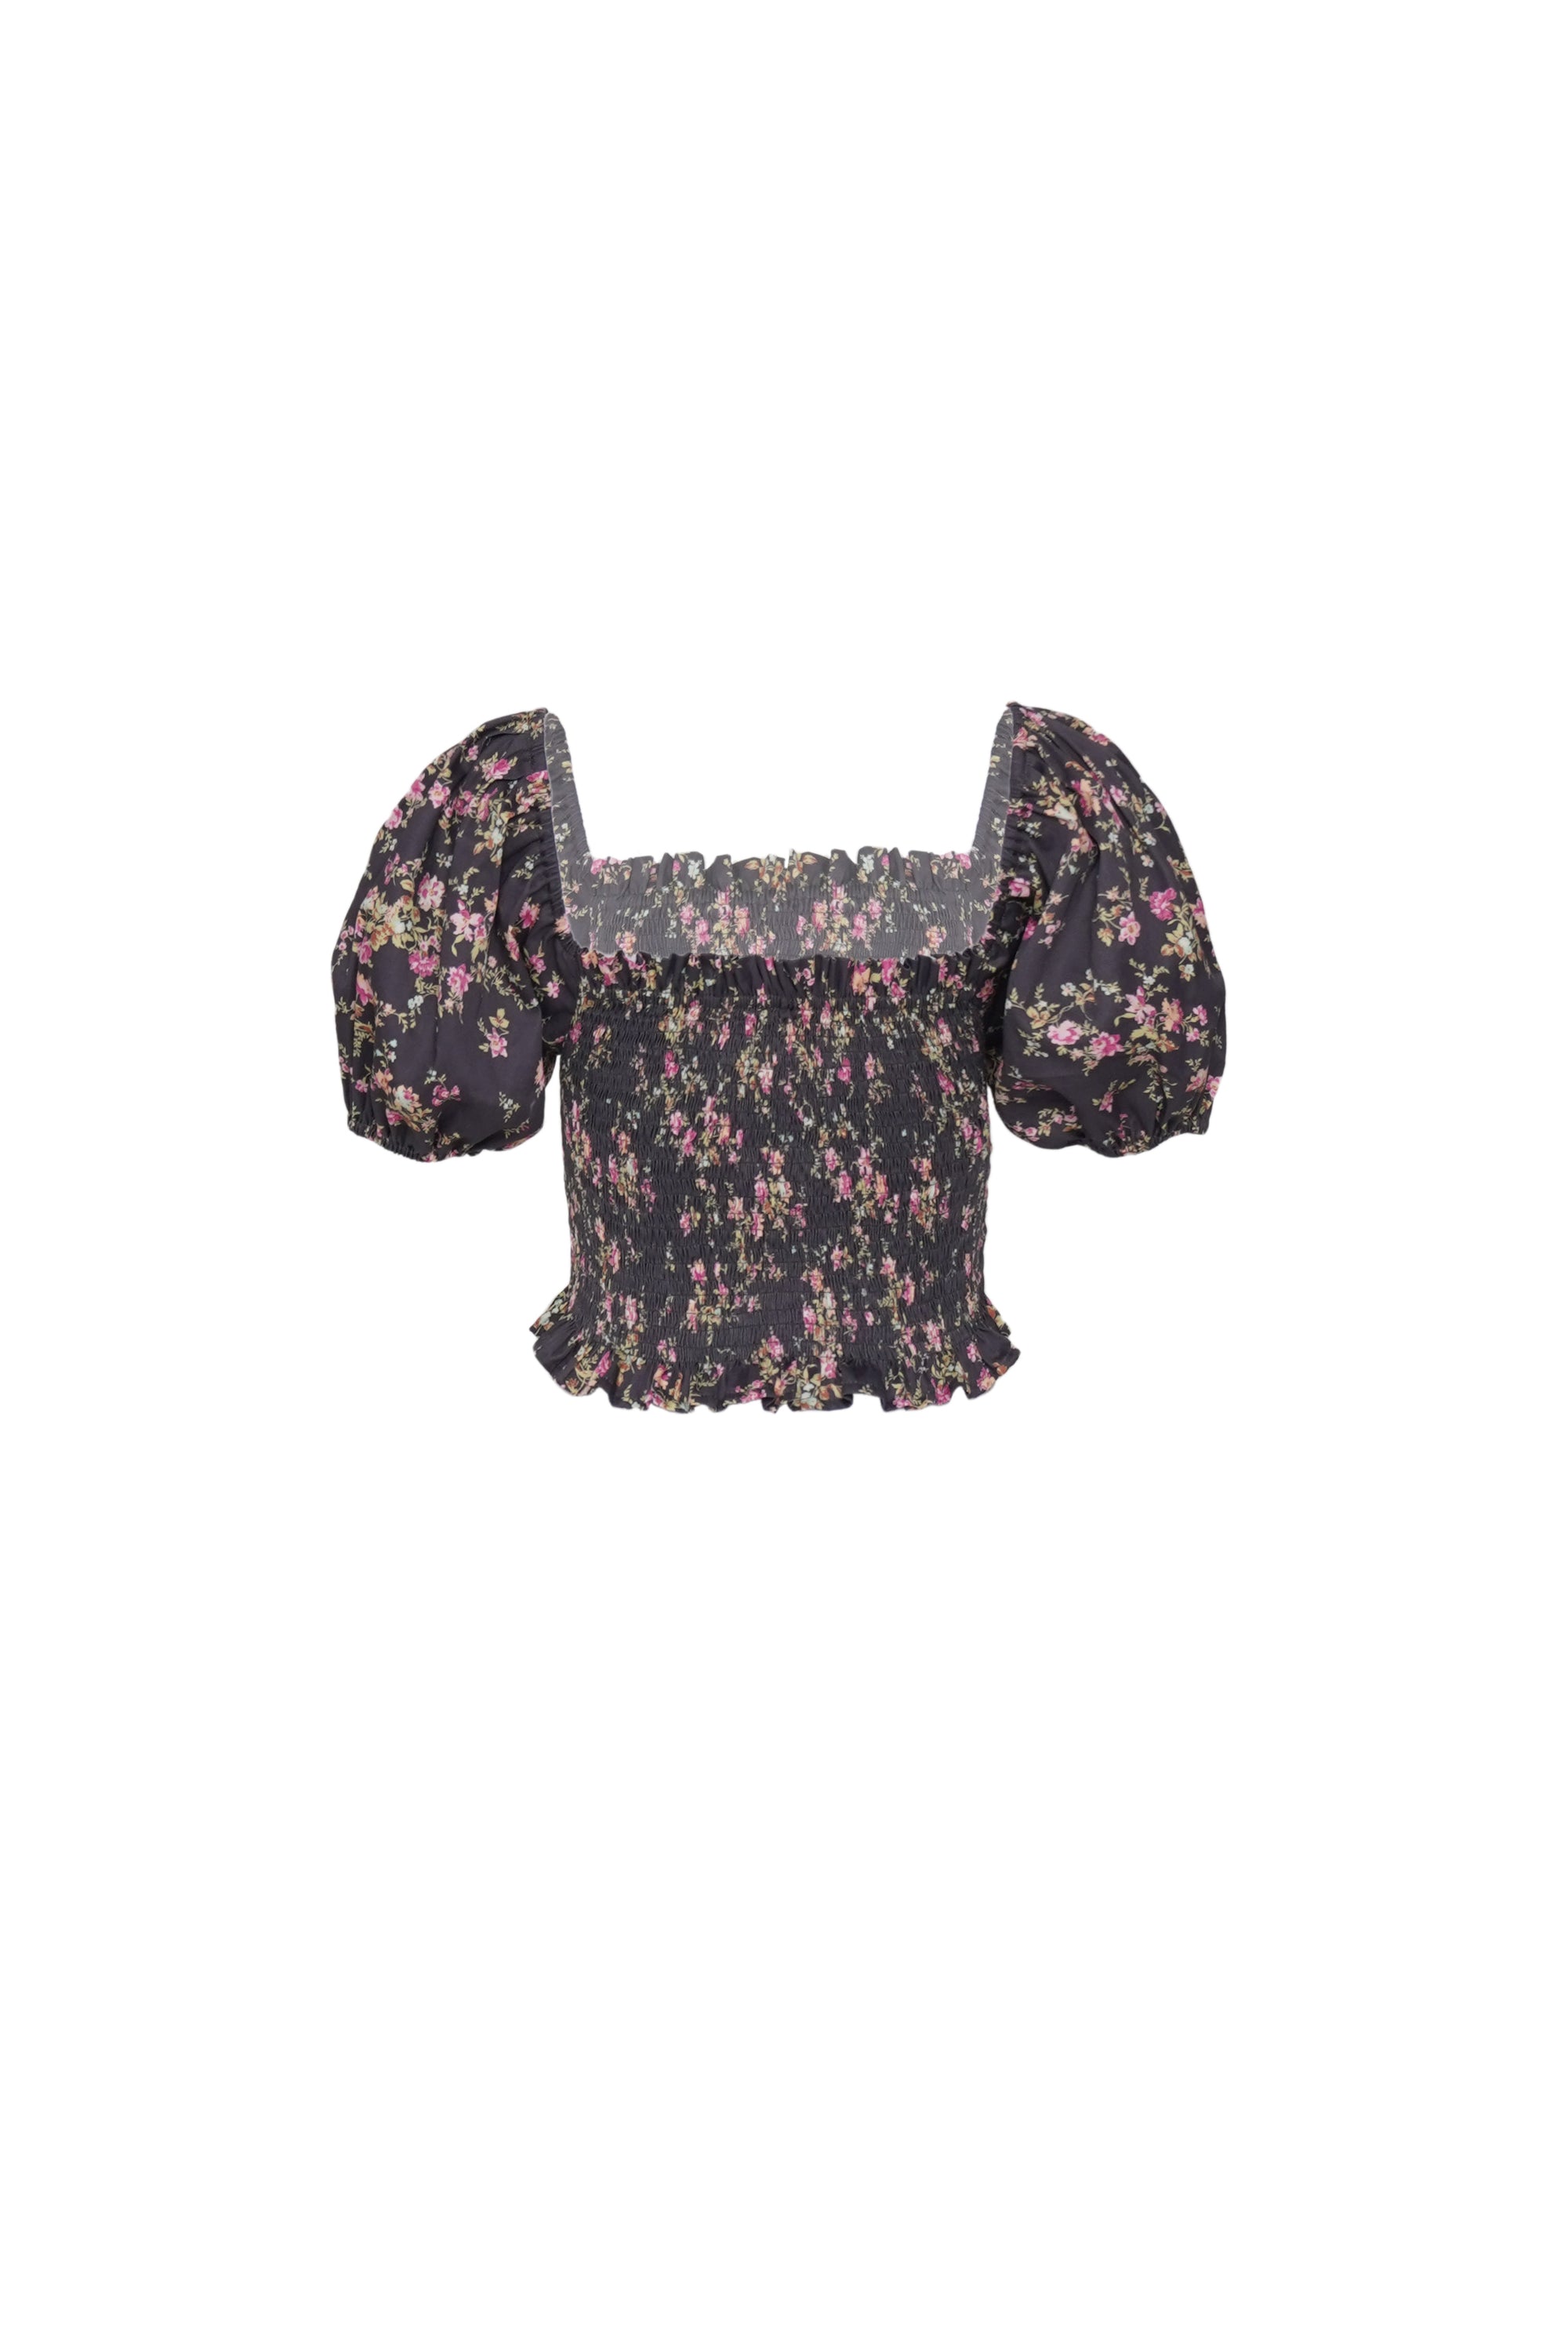 Back view of a floral print puff sleeve top